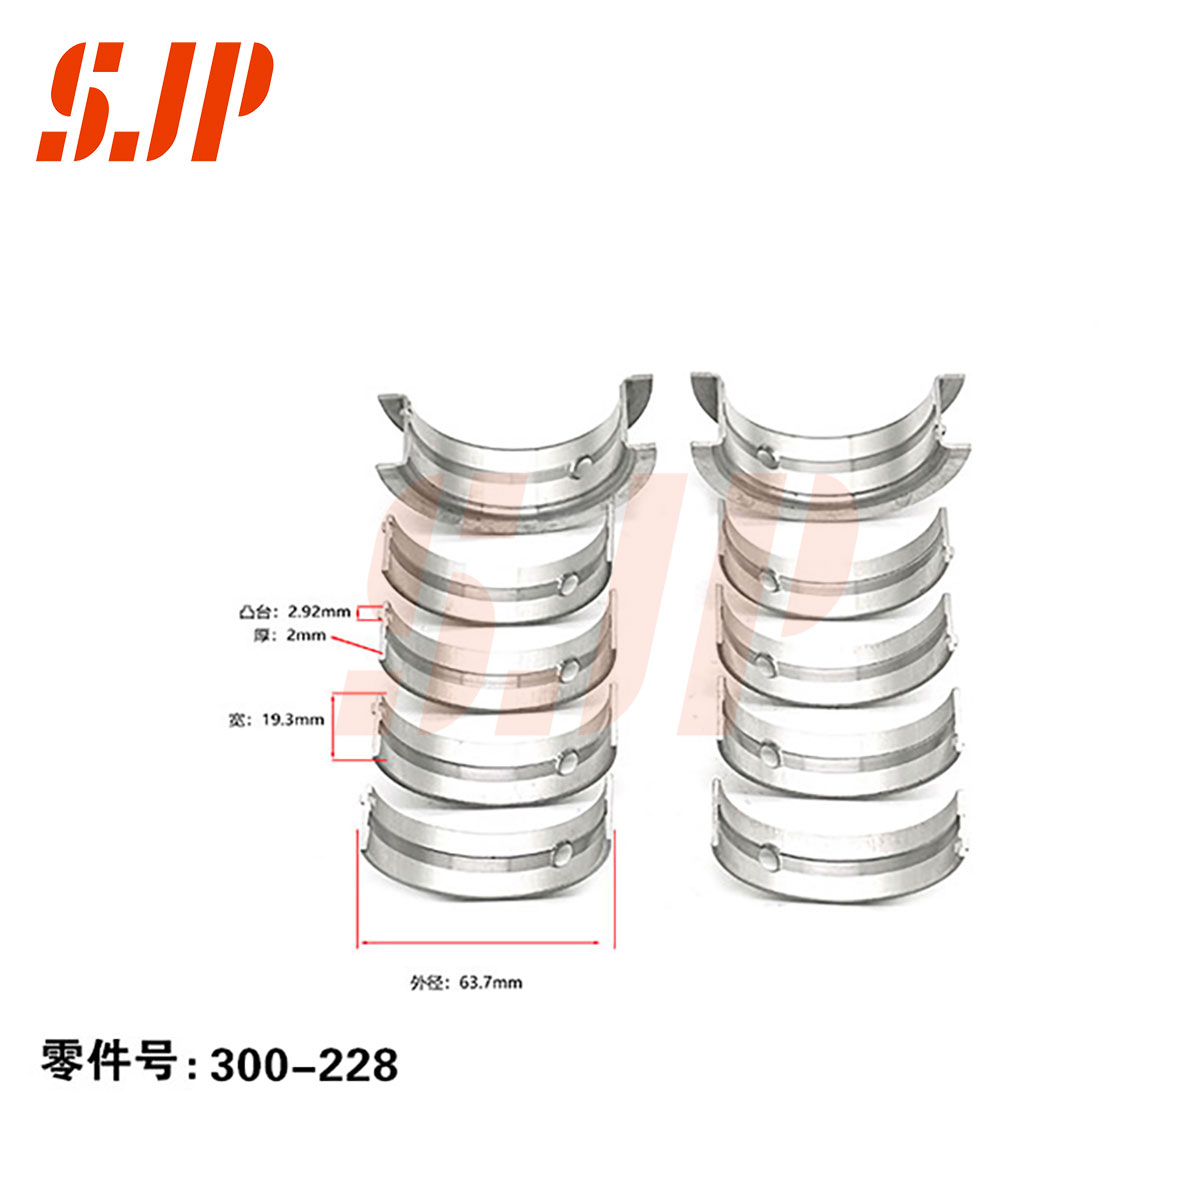 SJ-300-228 Main Bearing Set For GM Buick Excelle 1.8/2.0/Old Lacrosse 2.0